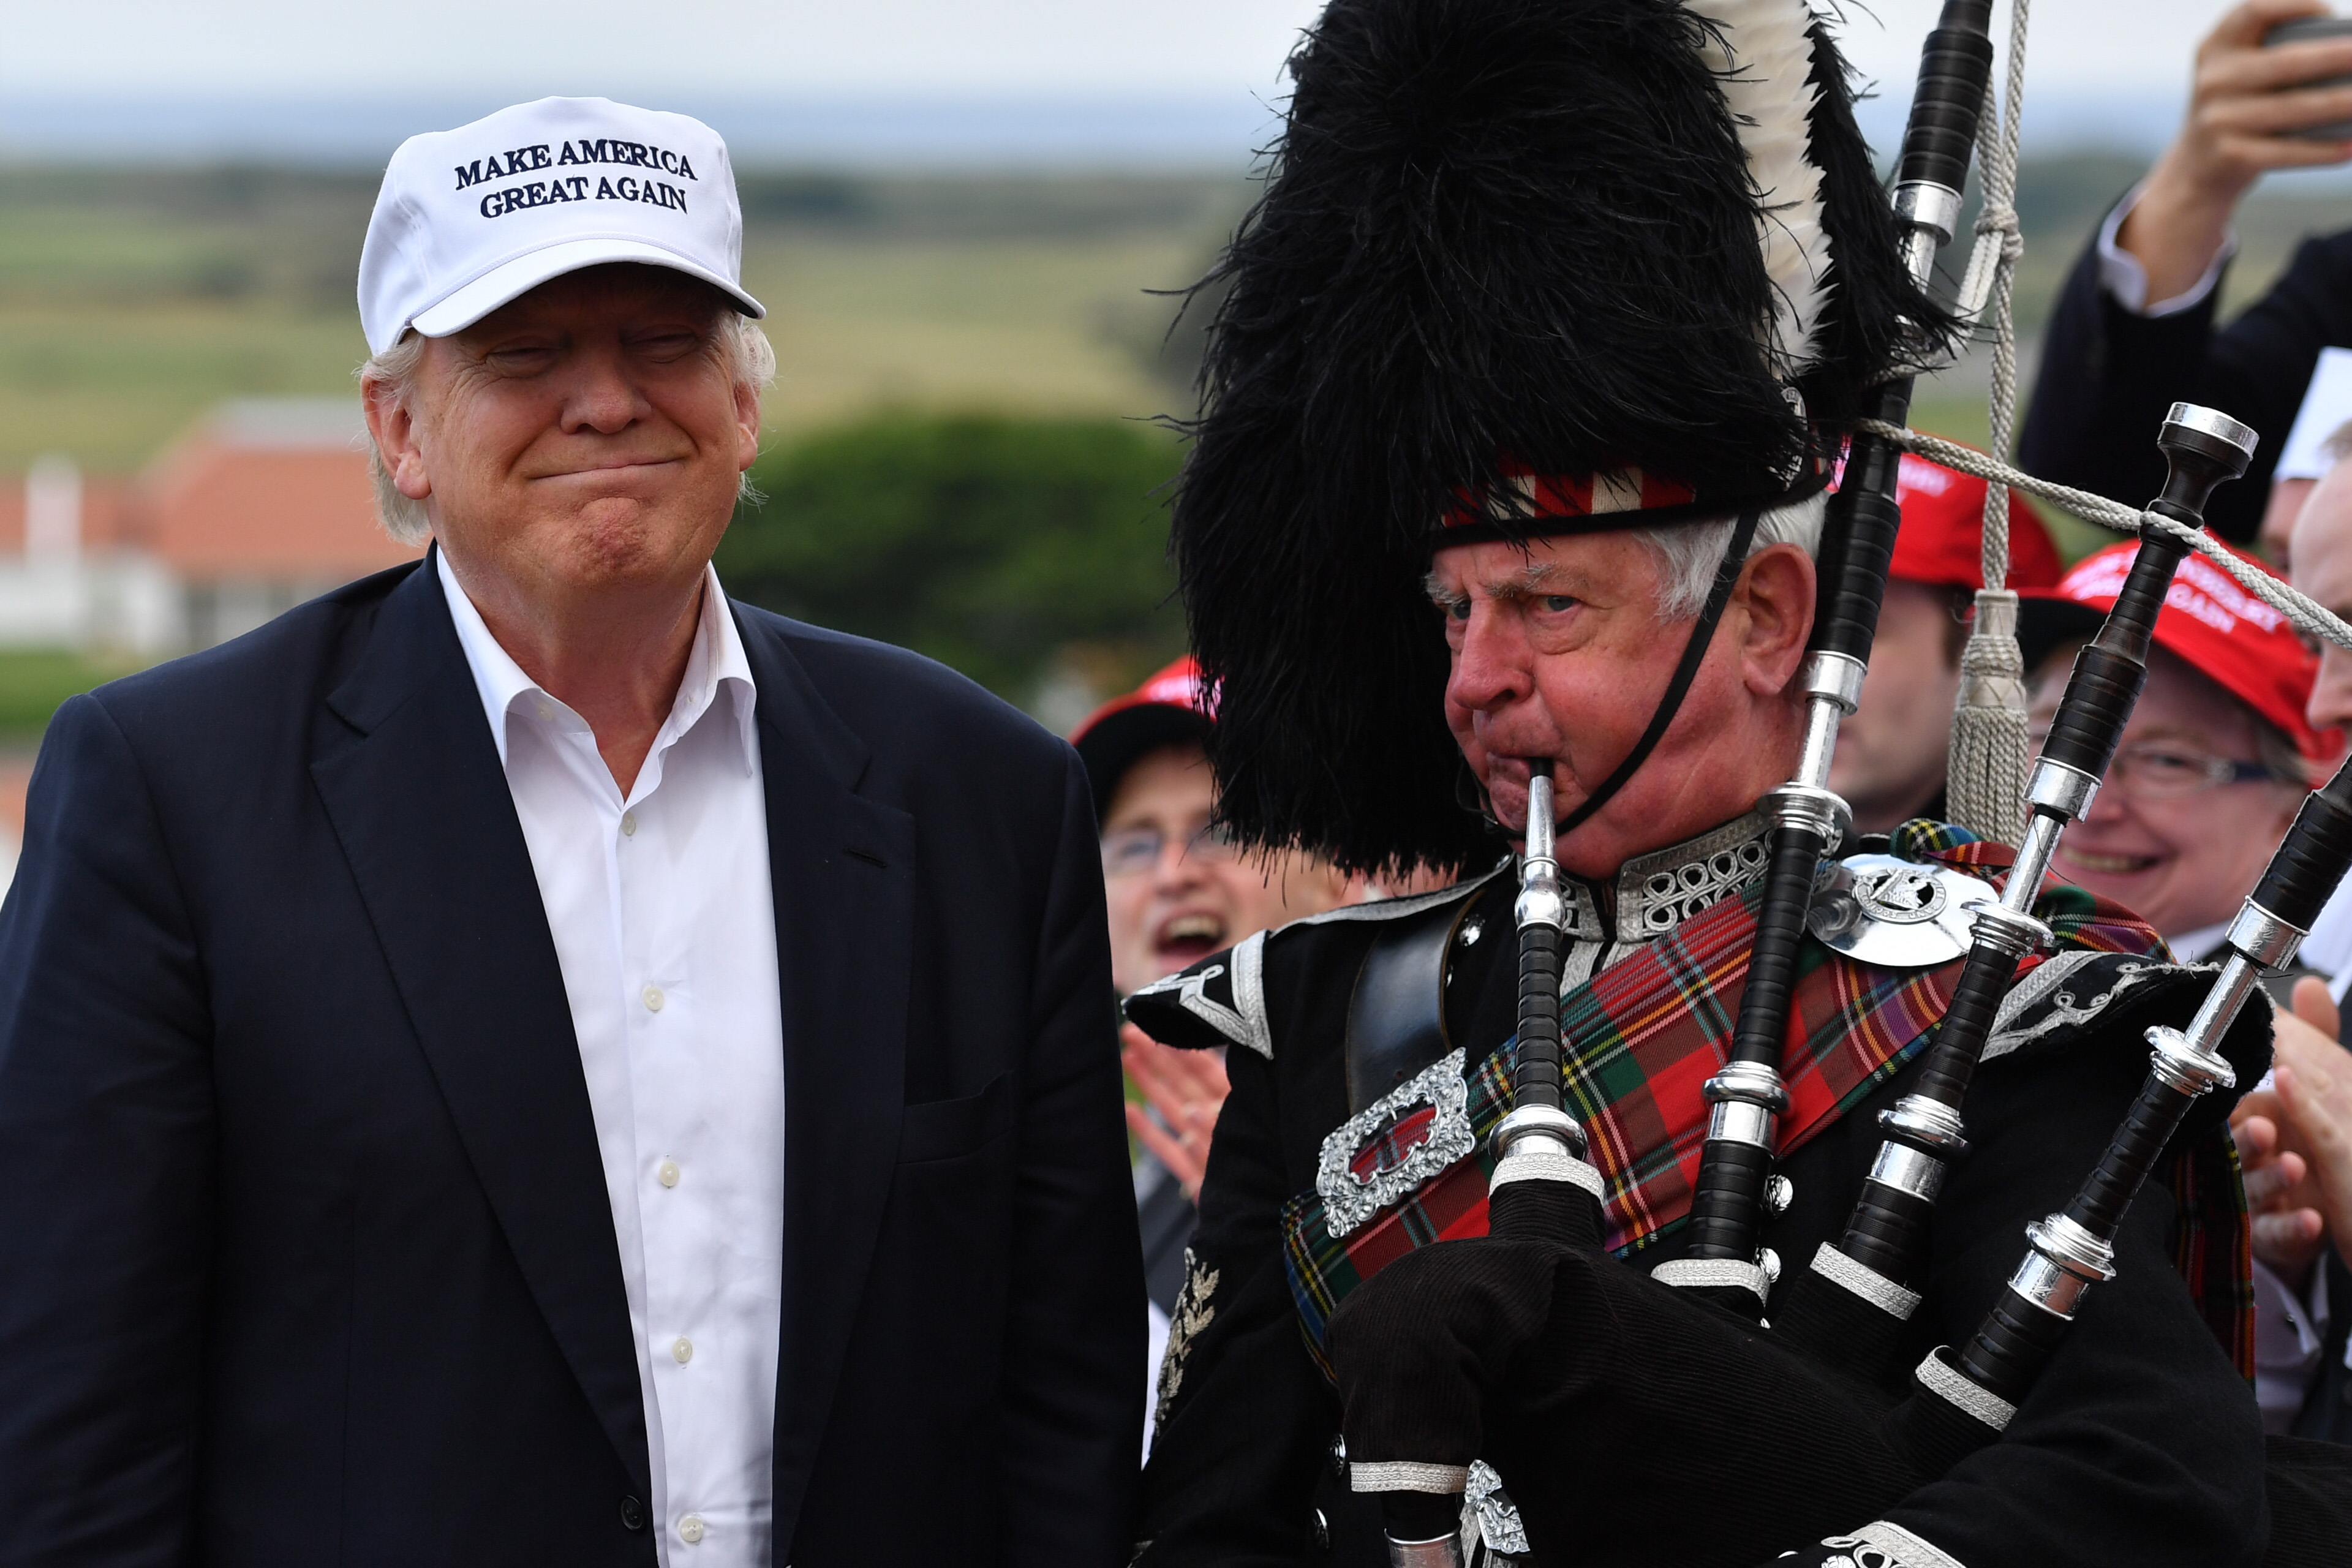 AYR, SCOTLAND - JUNE 24: A bagpipe player wears traditional dress next to Presumptive Republican nominee for US president Donald Trump as he arrives to his Trump Turnberry Resort on June 24, 2016 in Ayr, Scotland. Mr Trump arrived to officially open his golf resort which has undergone an eight month refurbishment as part of an investment thought to be worth in the region of two hundred million pounds. (Photo by Jeff J Mitchell/Getty Images)